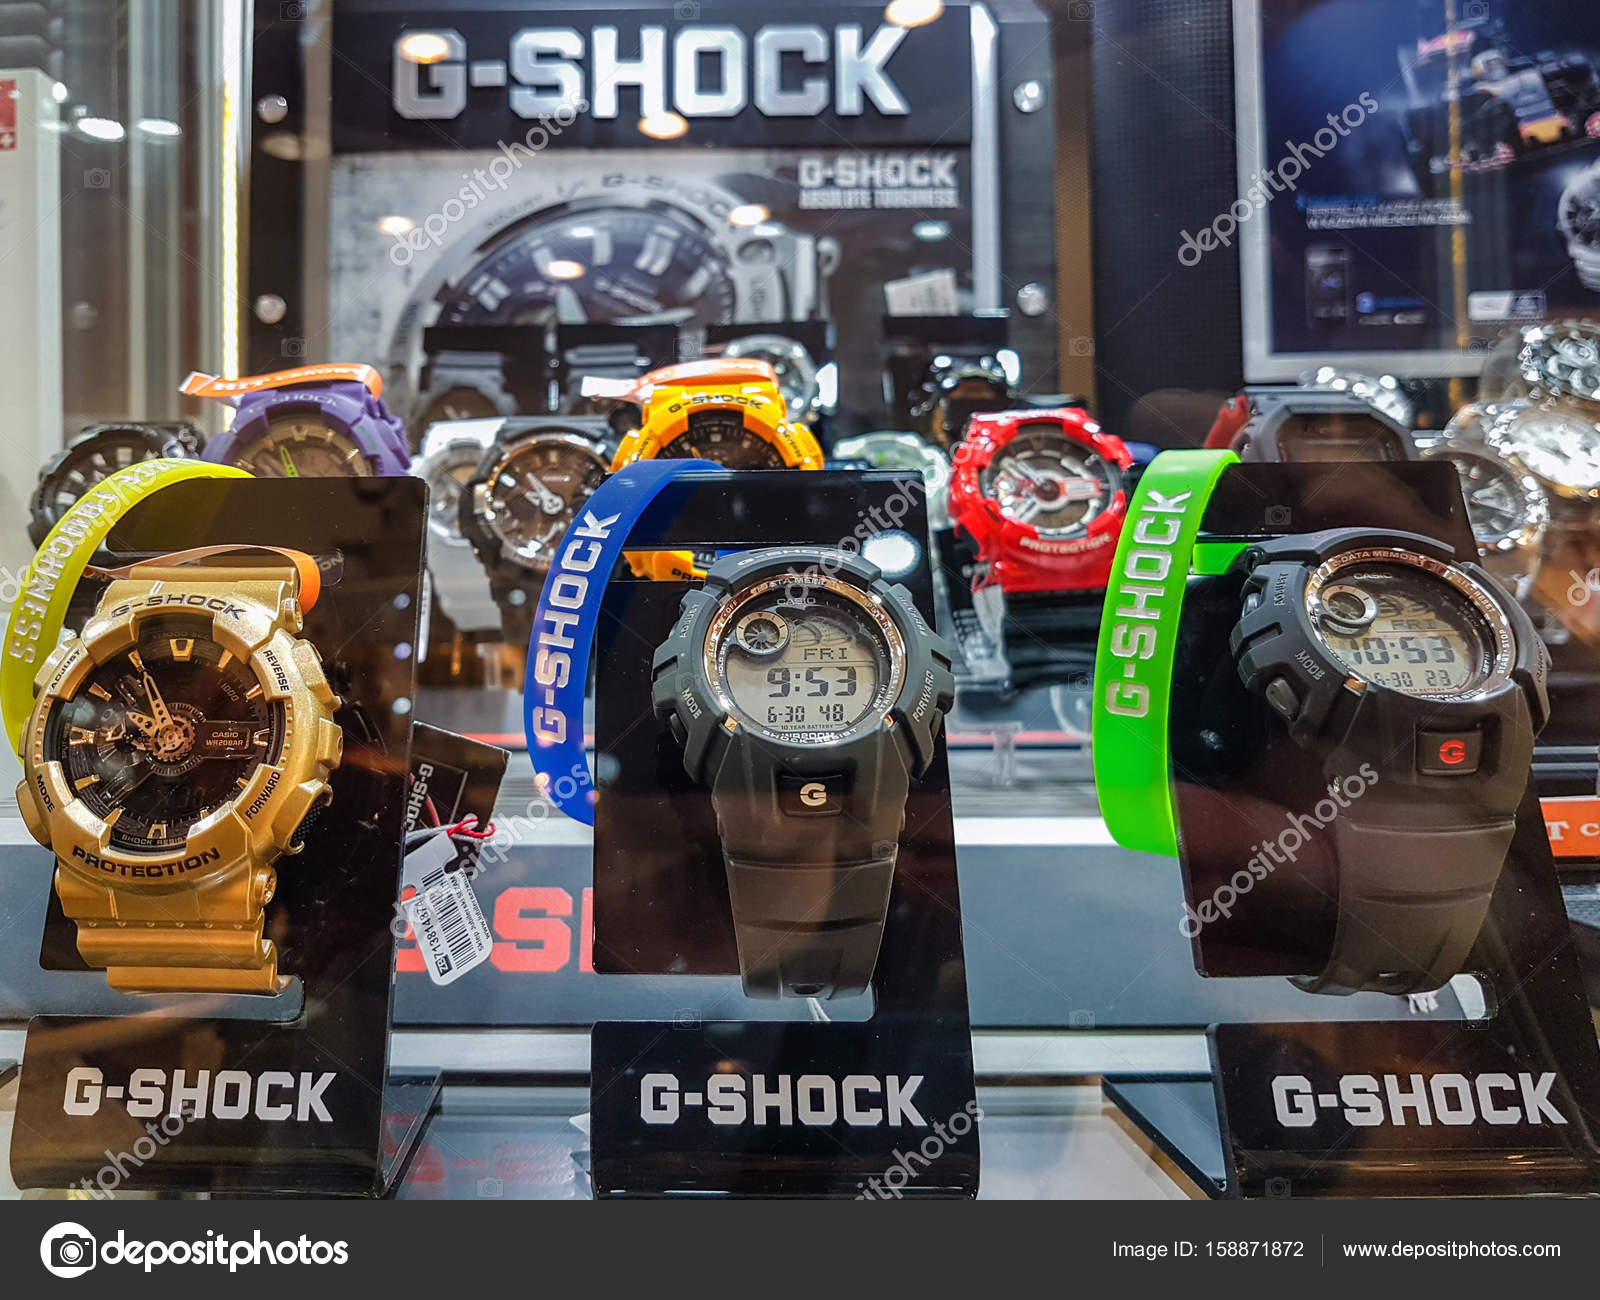 G Shock Watches For Sale - HD Wallpaper 